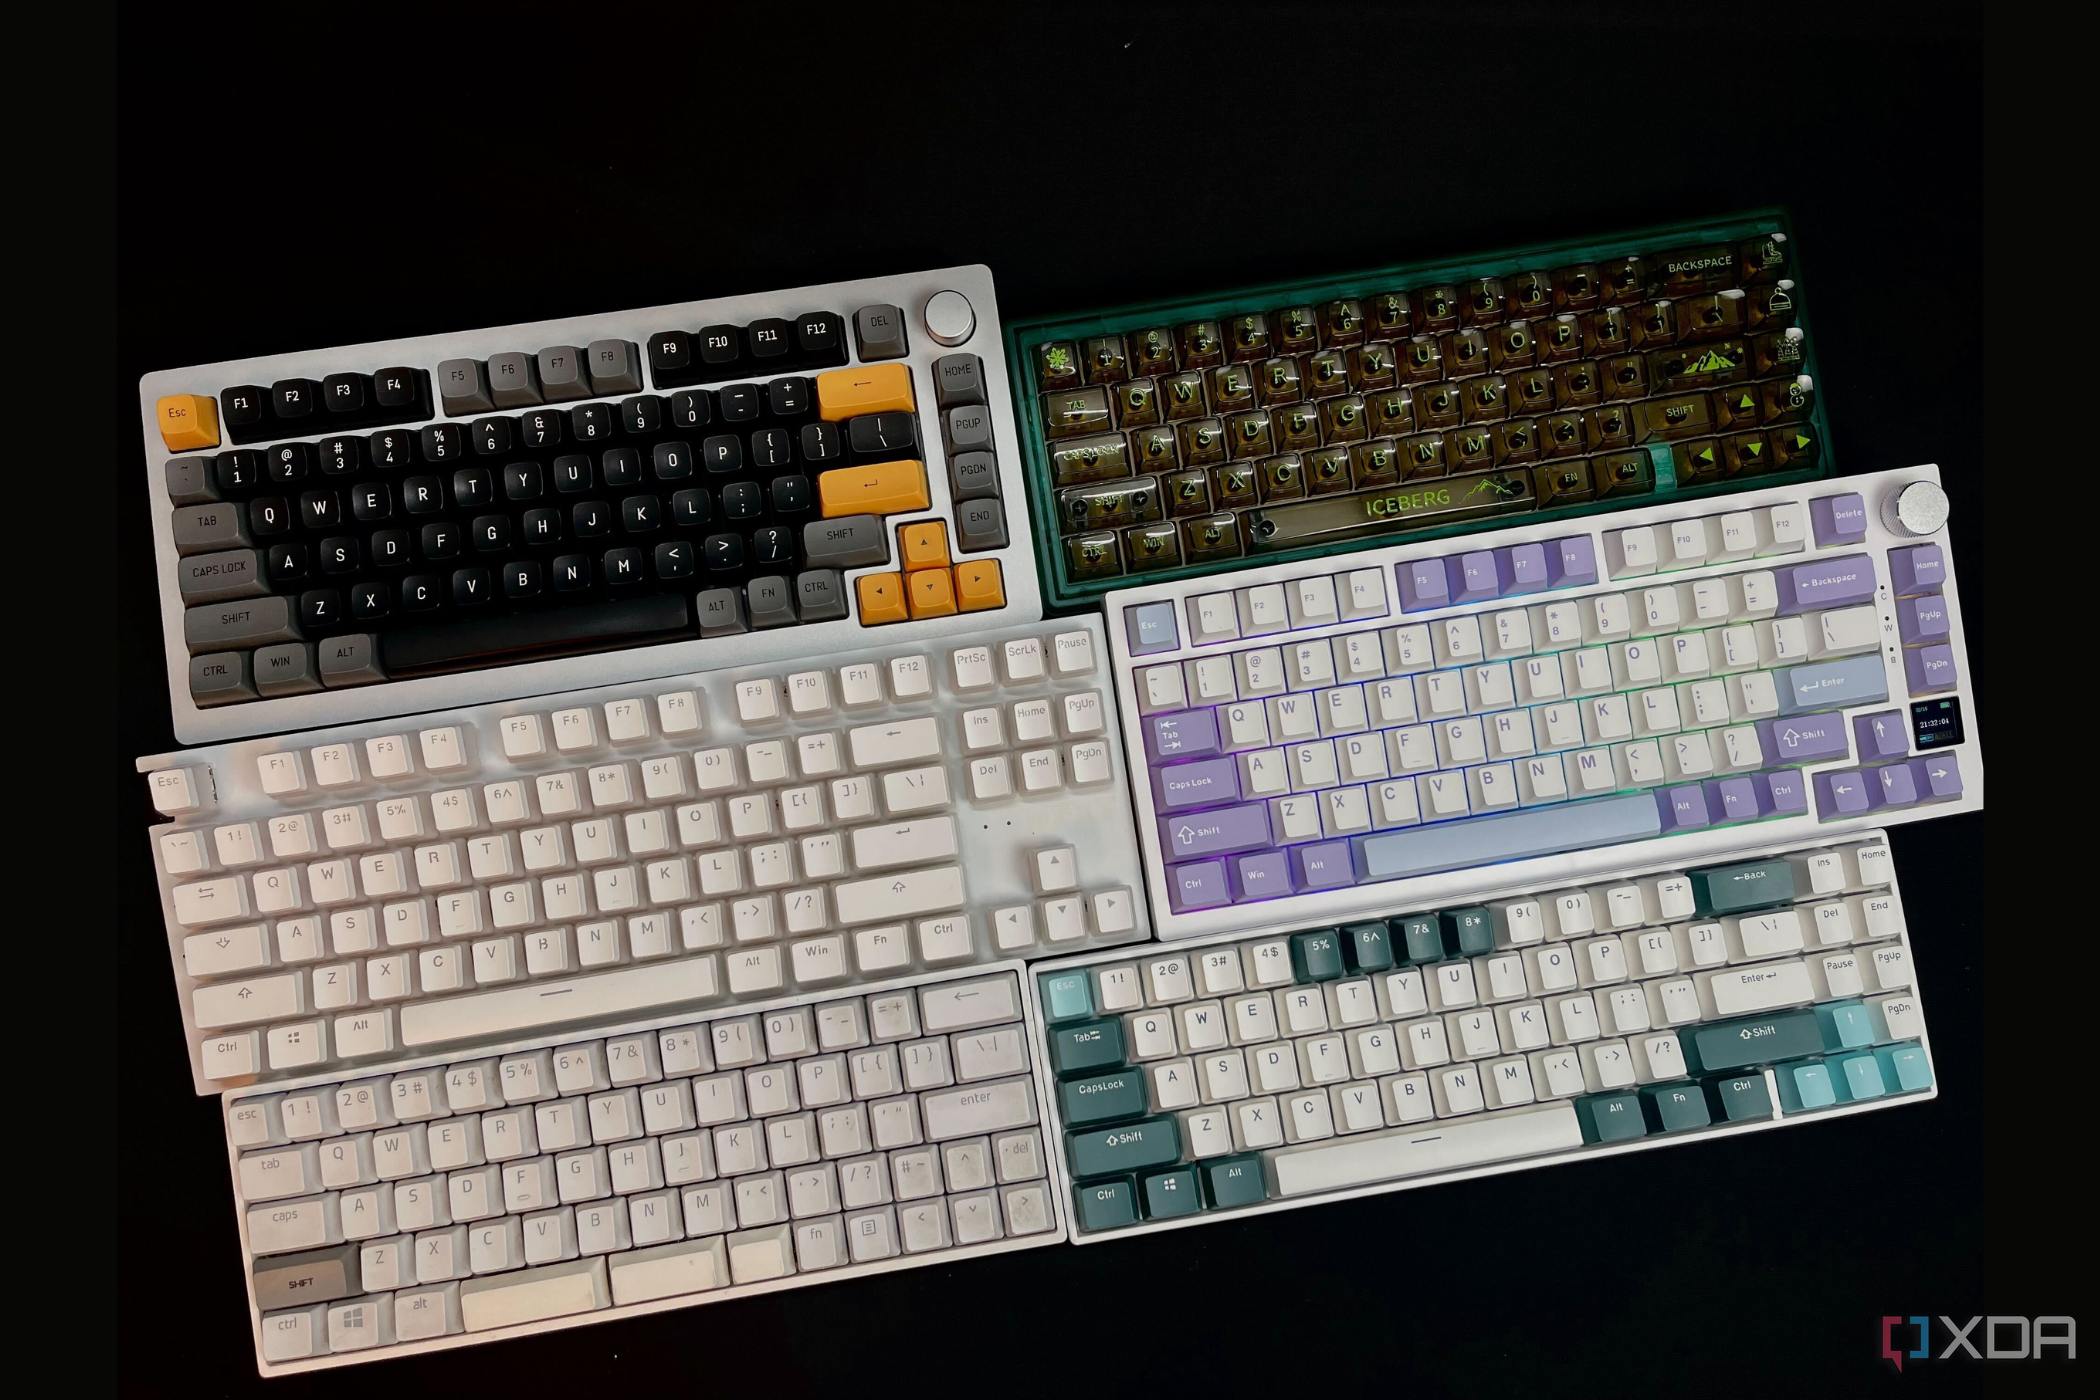 Image showing 6 mechanical keyboards incluiding Monsgeek m1 with the black and yellow keycaps, ciy gas67 with transparent keycaps, nzxt function tkl keyboard, ajazz ak 820 pro in purple blue and white keycaps, skyloong sk68 and a rk 71 in the camp green color scheme.